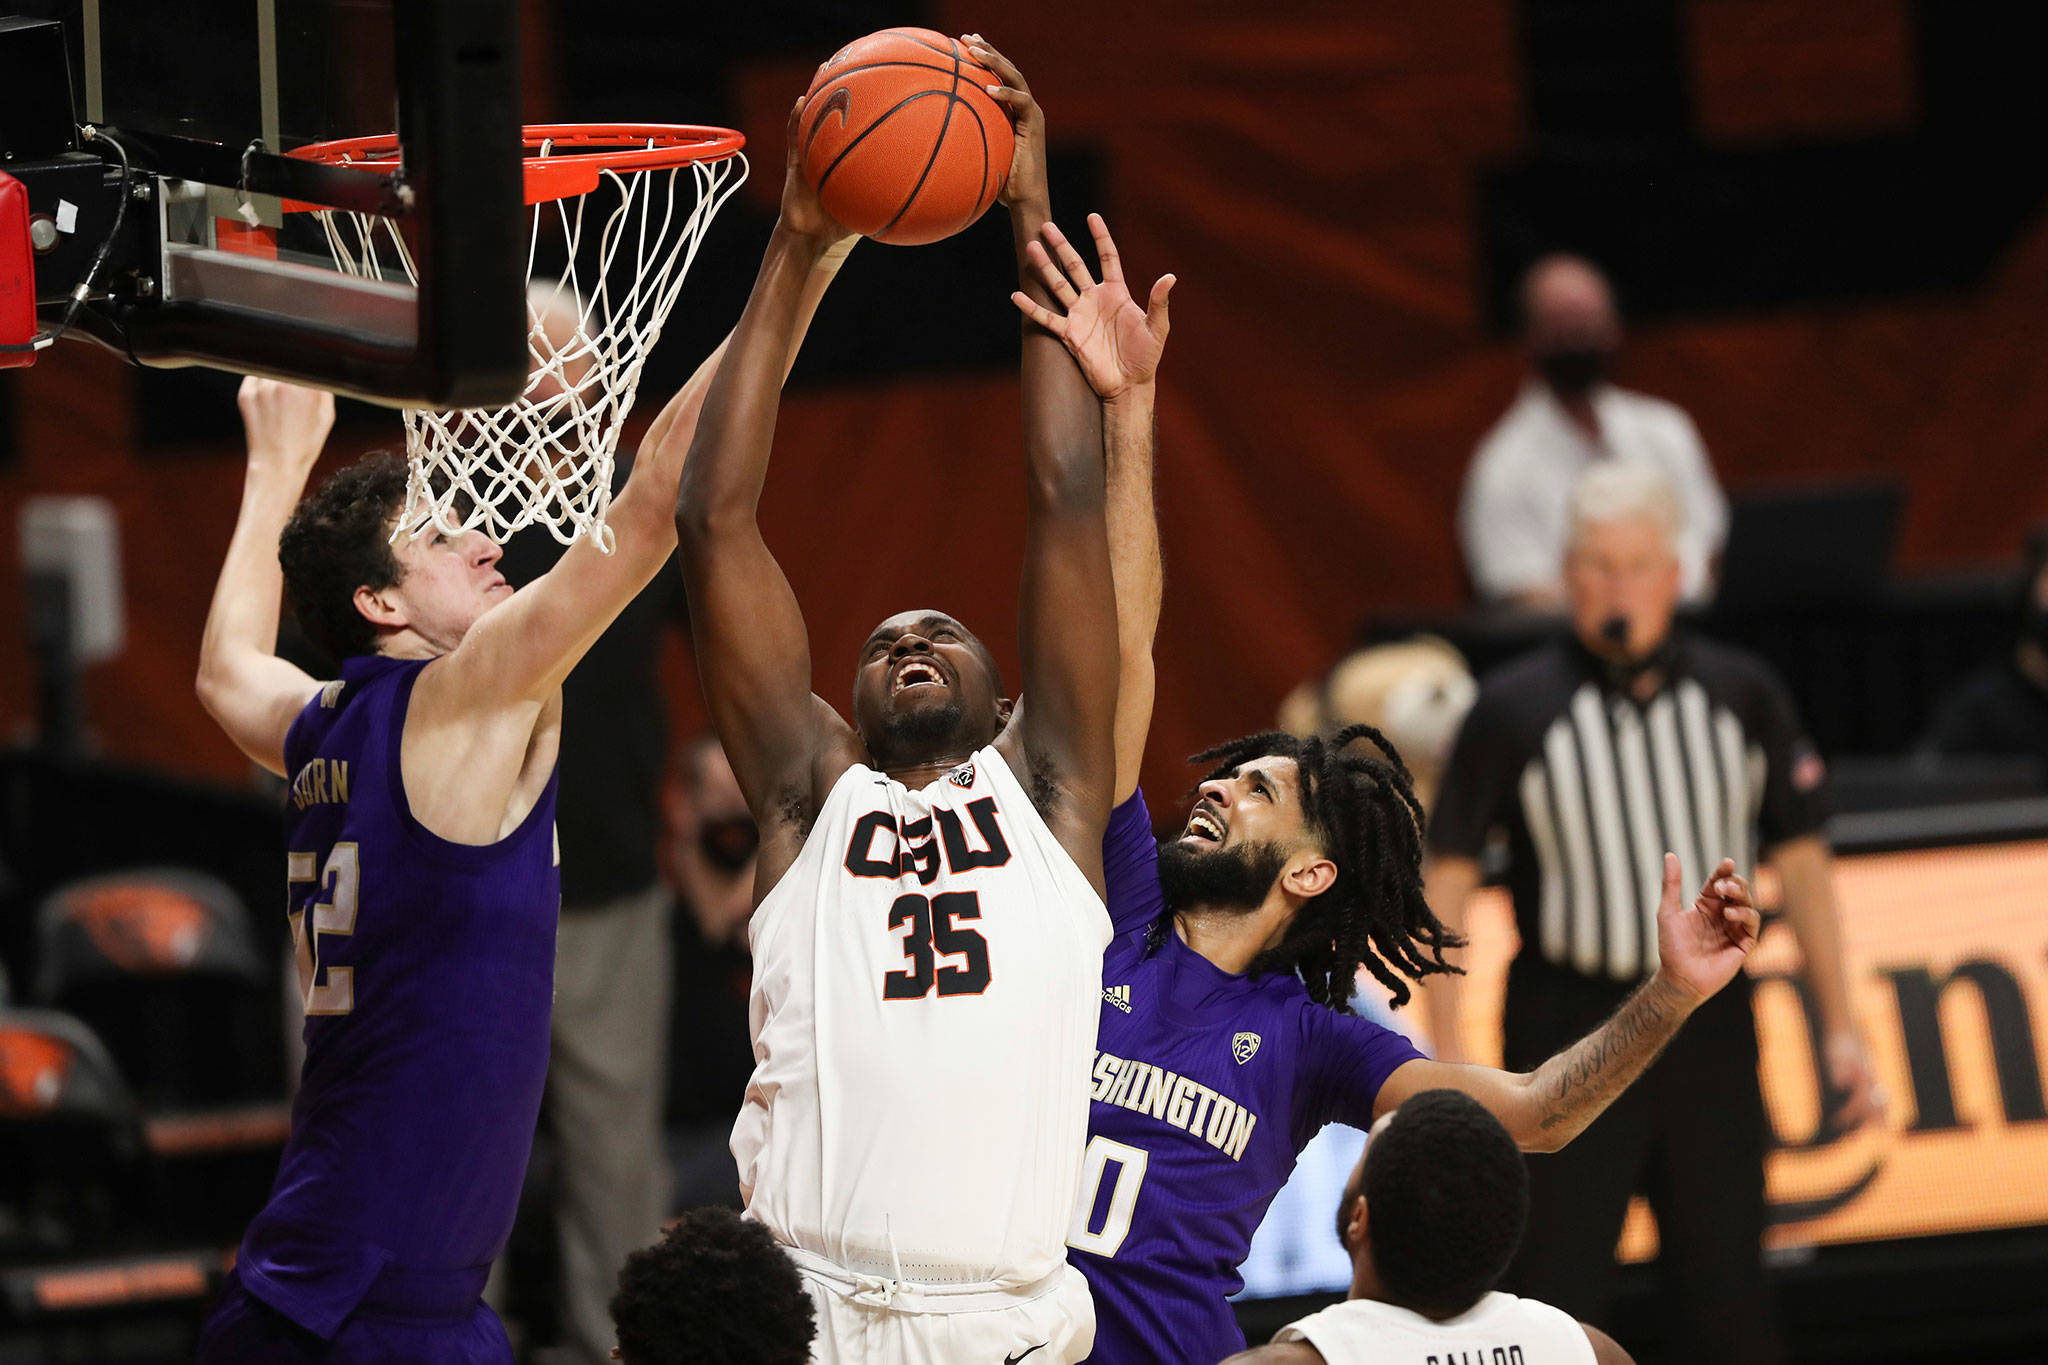 Washington’s Riley Sorn (left) and Marcus Tsohonis (right) fight with Oregon State’s Dearon Tucker for possession of a rebound during the first half of a game Feb. 4, 2021, in Corvallis, Ore. (AP Photo/Amanda Loman)